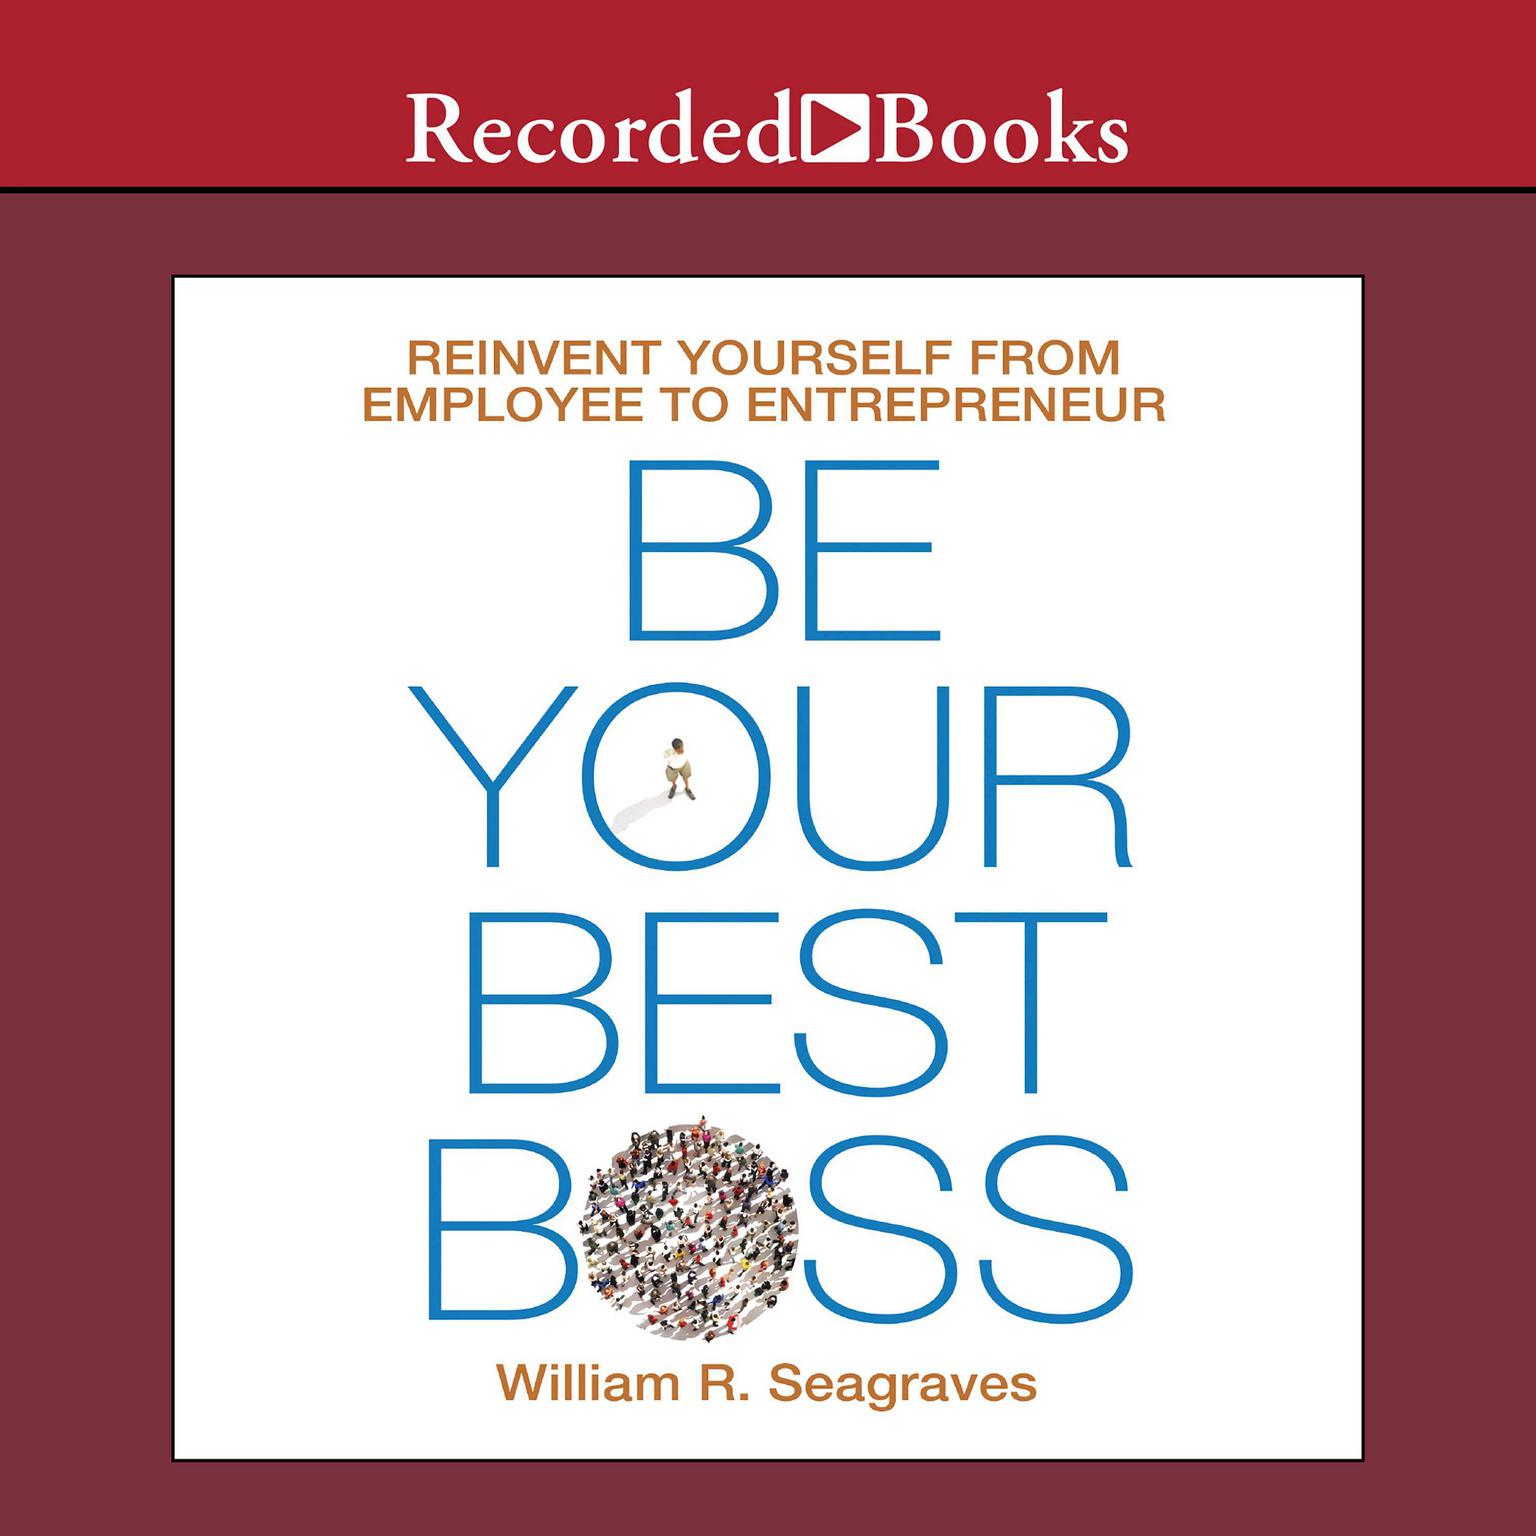 Be Your Best Boss: Reinvent Yourself from Employee to Entrepreneur Audiobook, by William R. Seagraves